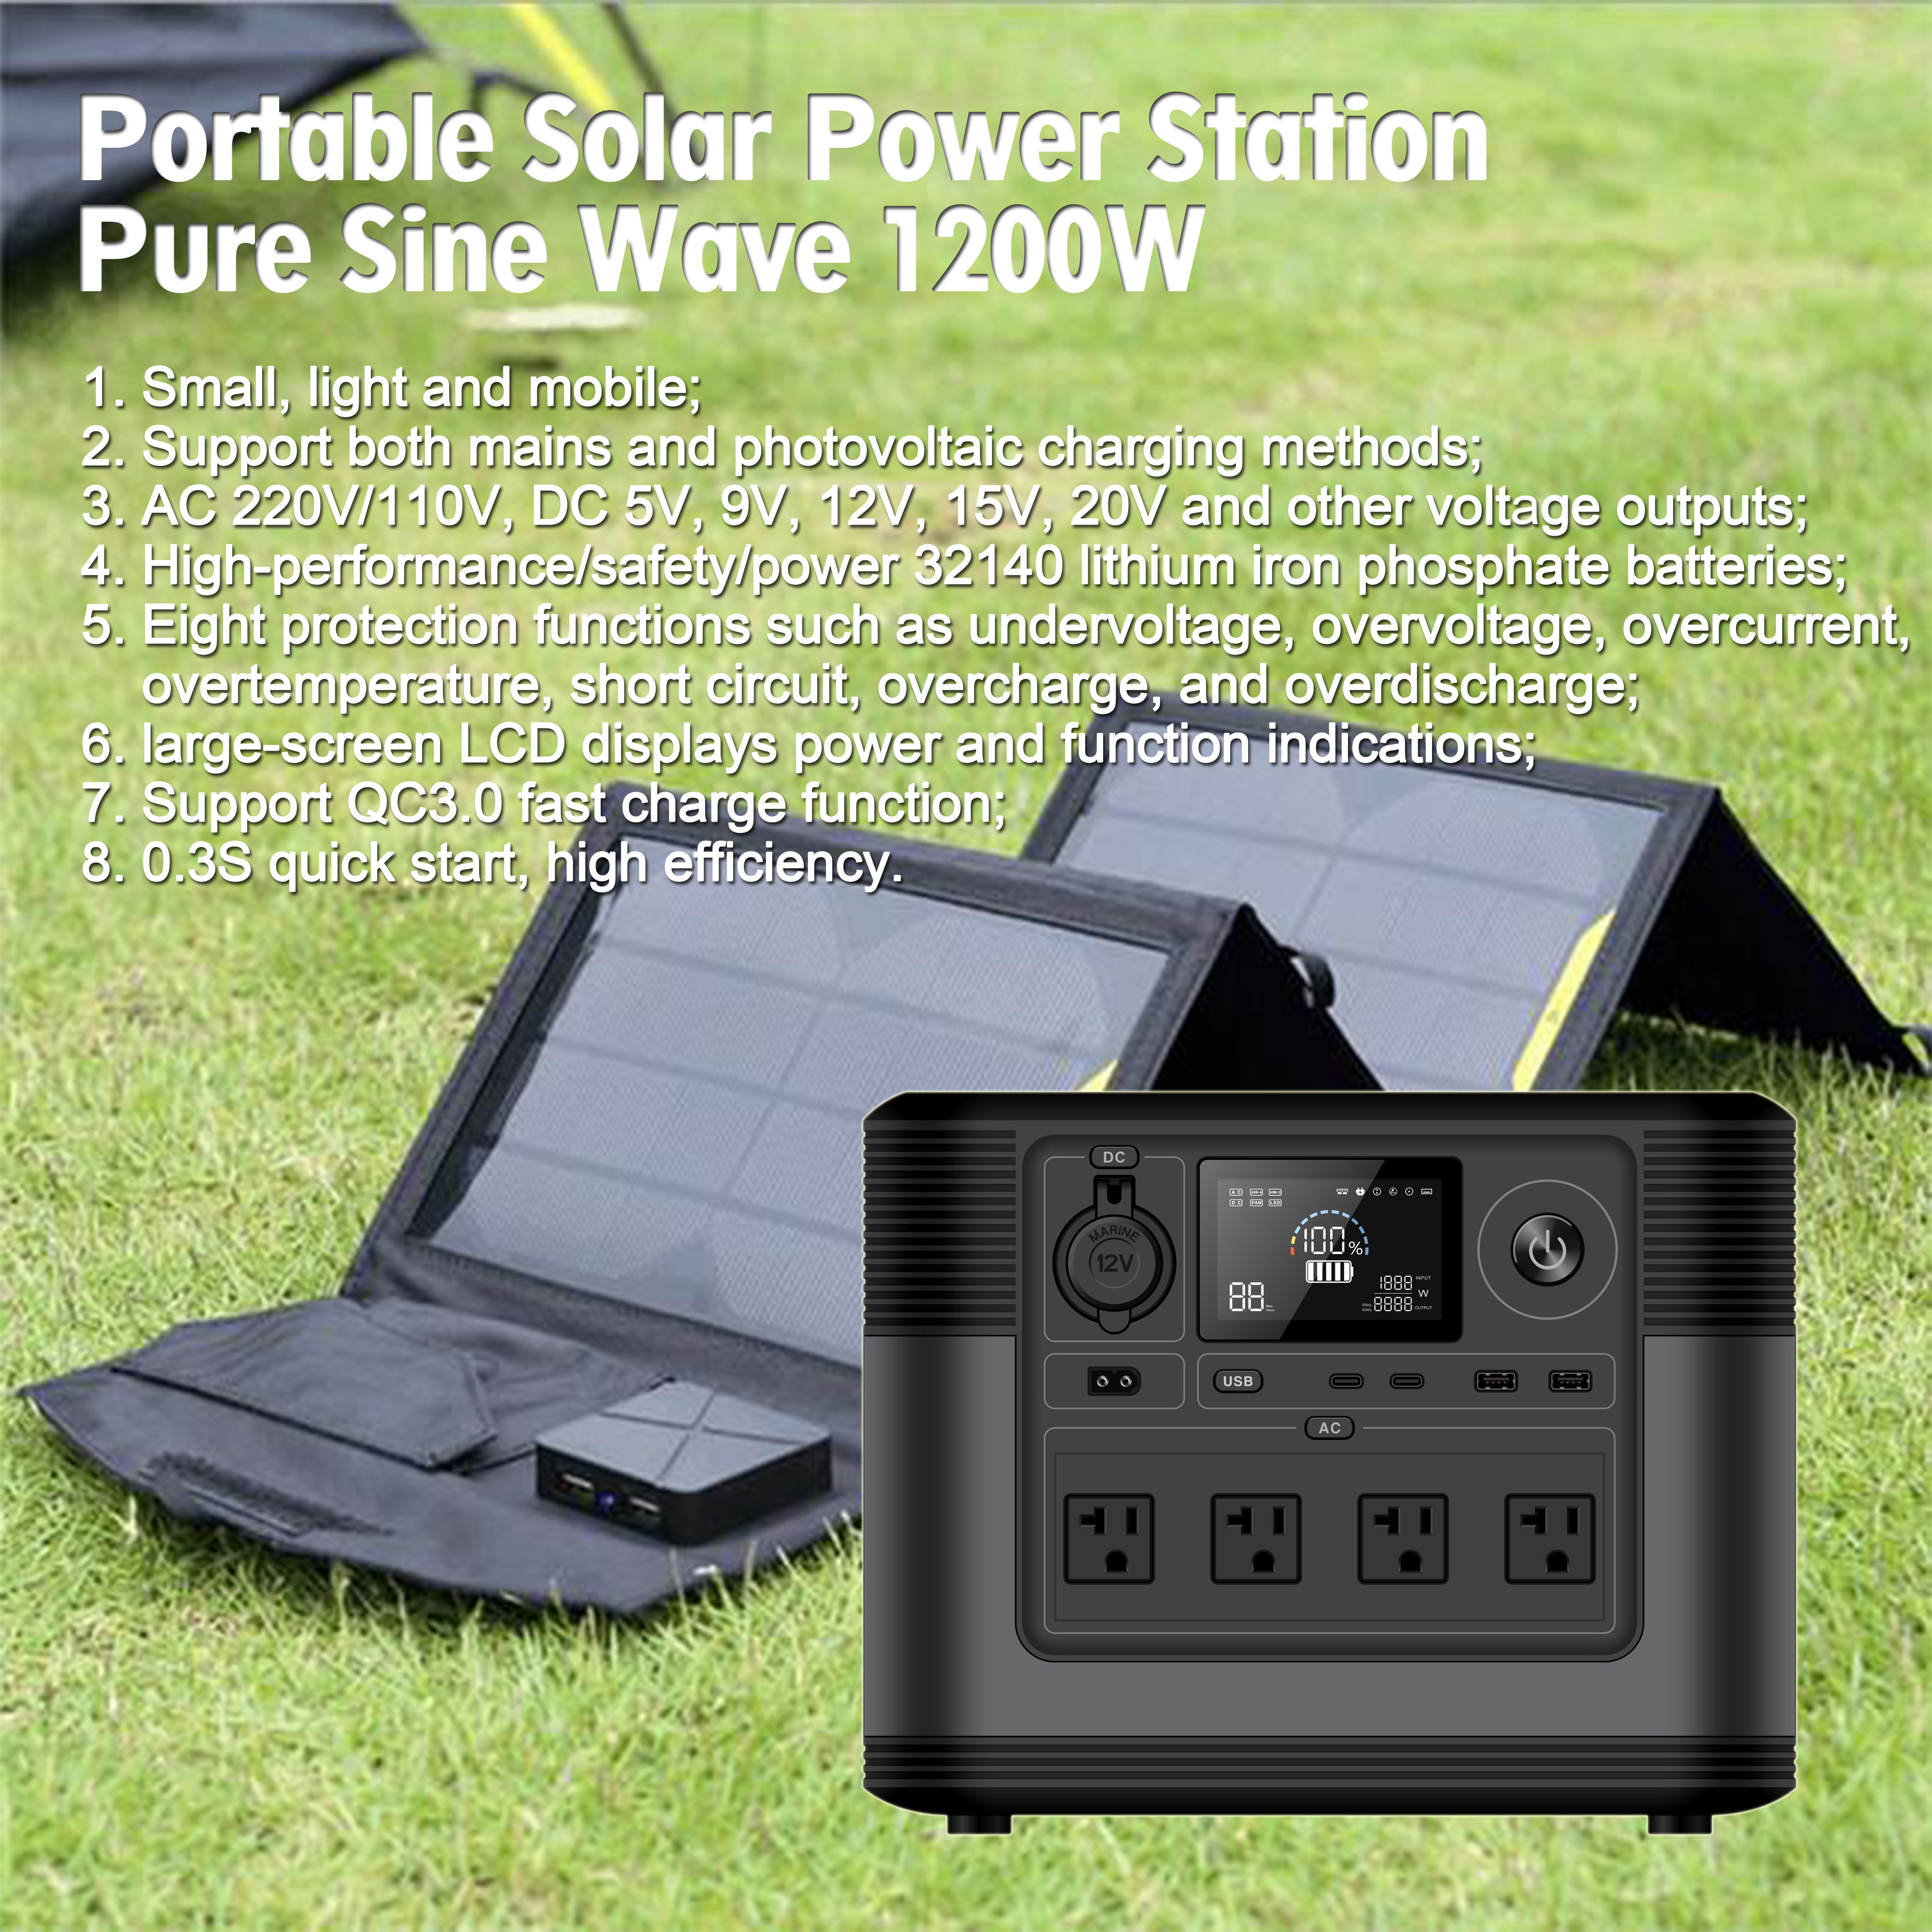 Portable Power Station Function (4)